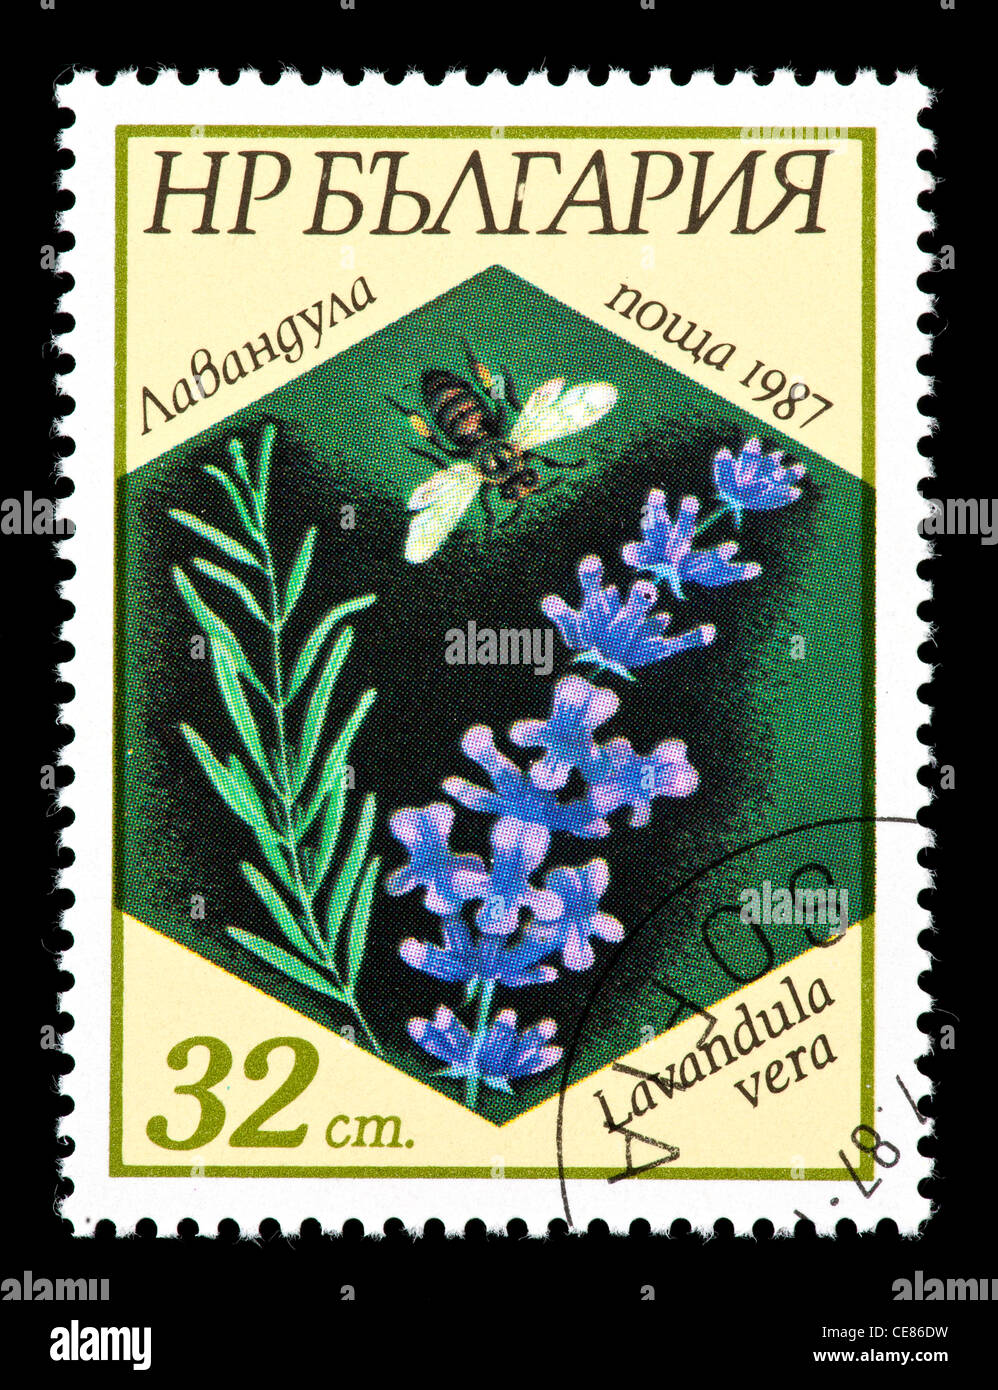 Postage stamp from Bulgaria depicting a bee and lavender (Lavandula vera). Stock Photo